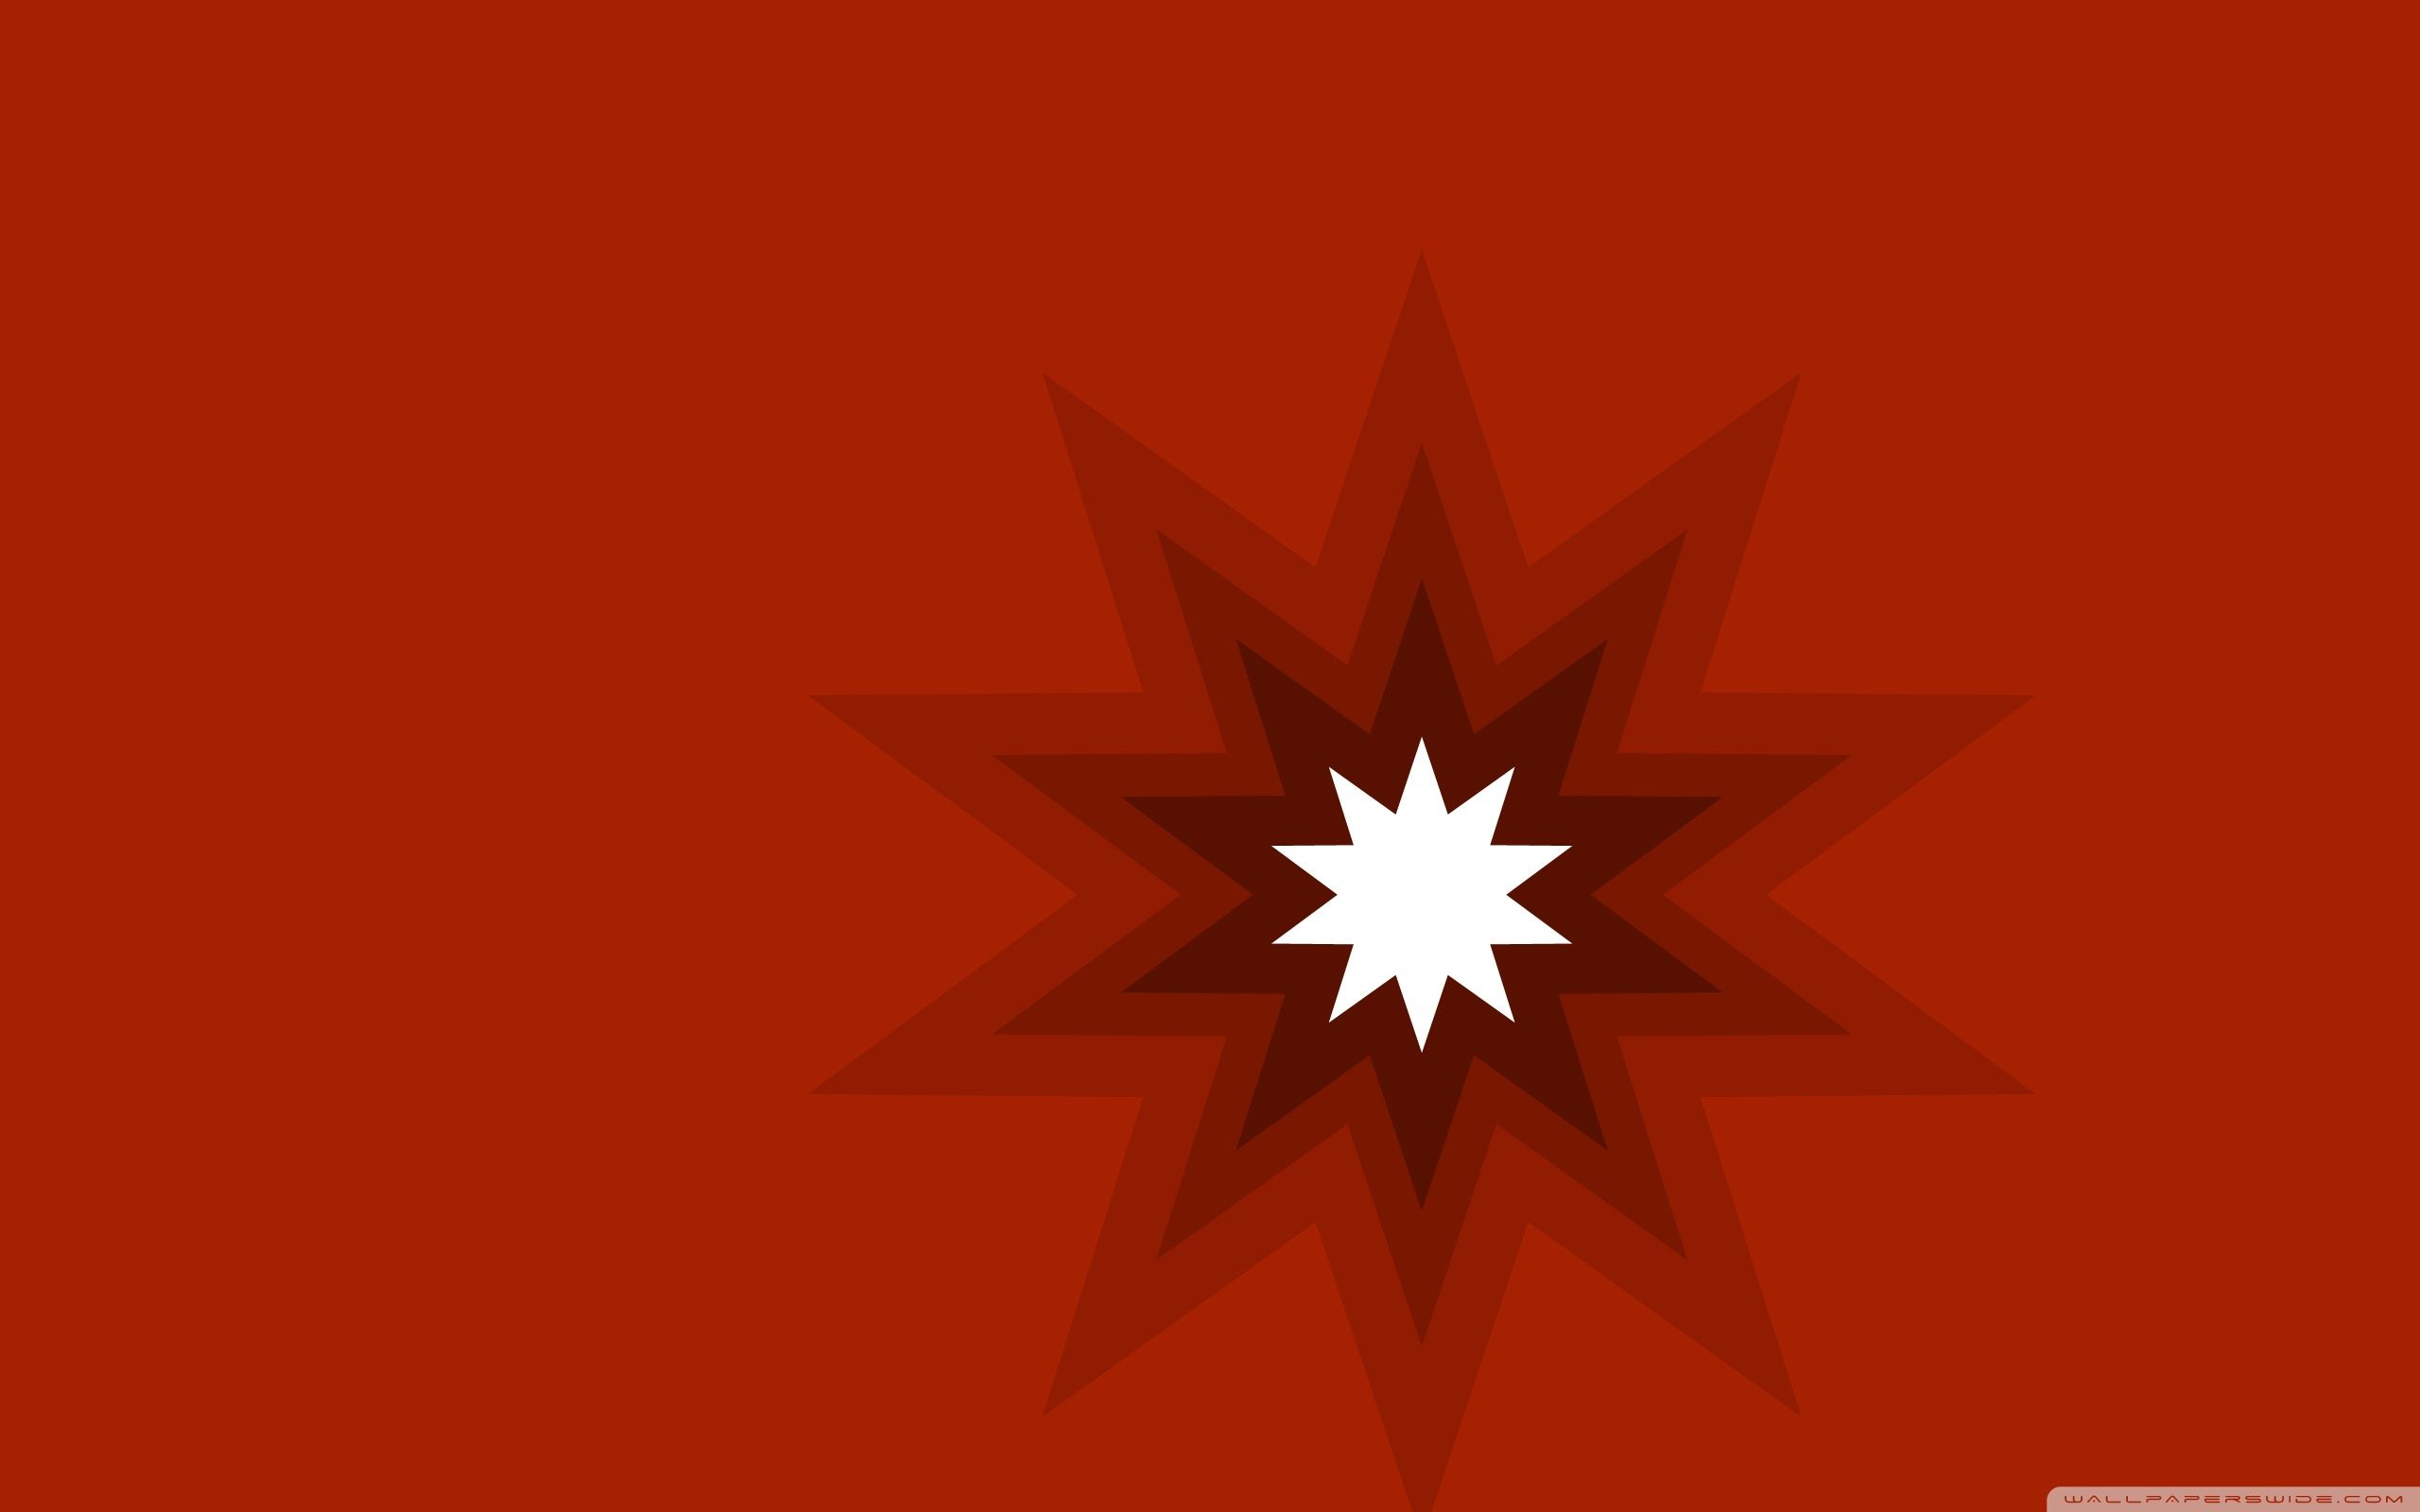 Red Star Wallpapers On Wallpaperdog